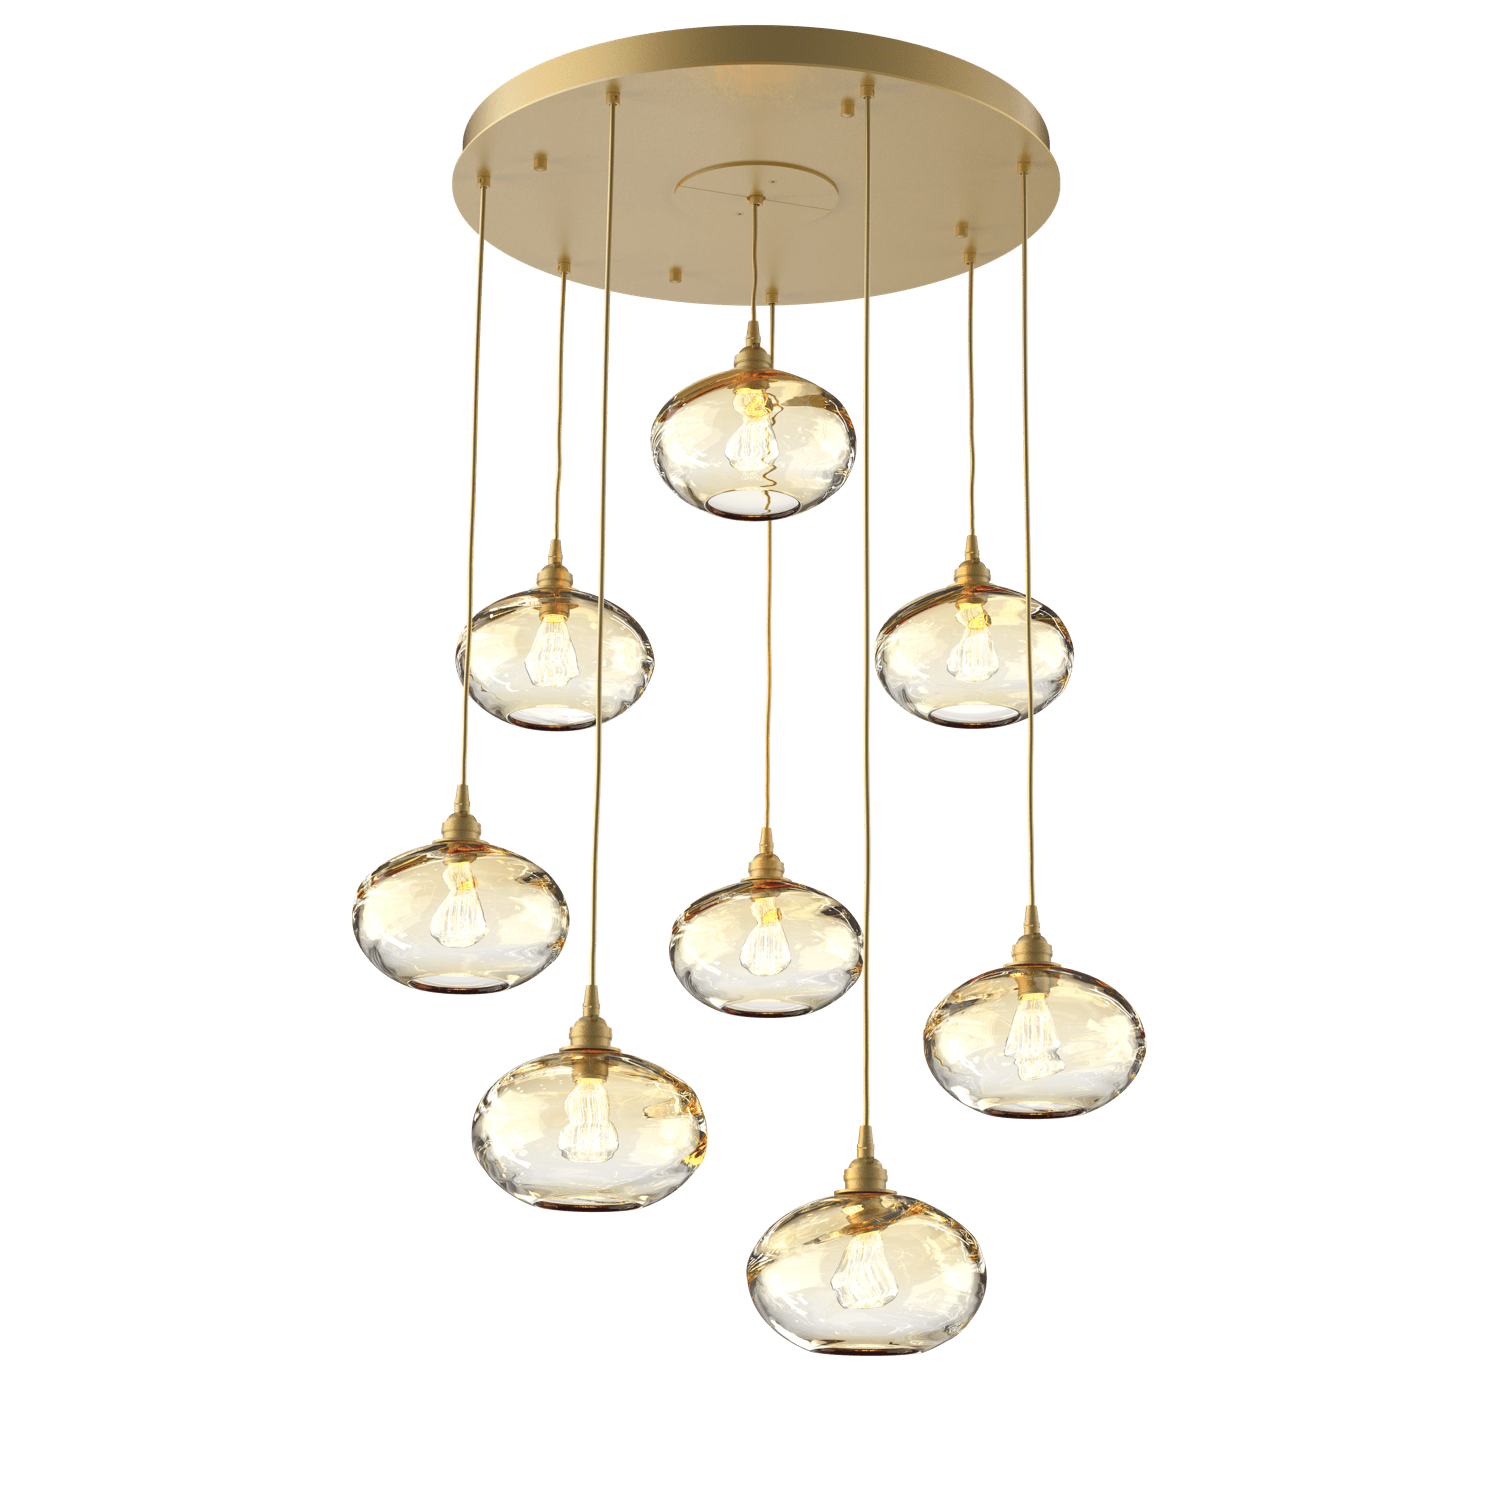 CHB0036-08-GB-OA-Hammerton-Studio-Optic-Blown-Glass-Coppa-8-light-round-pendant-chandelier-with-gilded-brass-finish-and-optic-amber-blown-glass-shades-and-incandescent-lamping